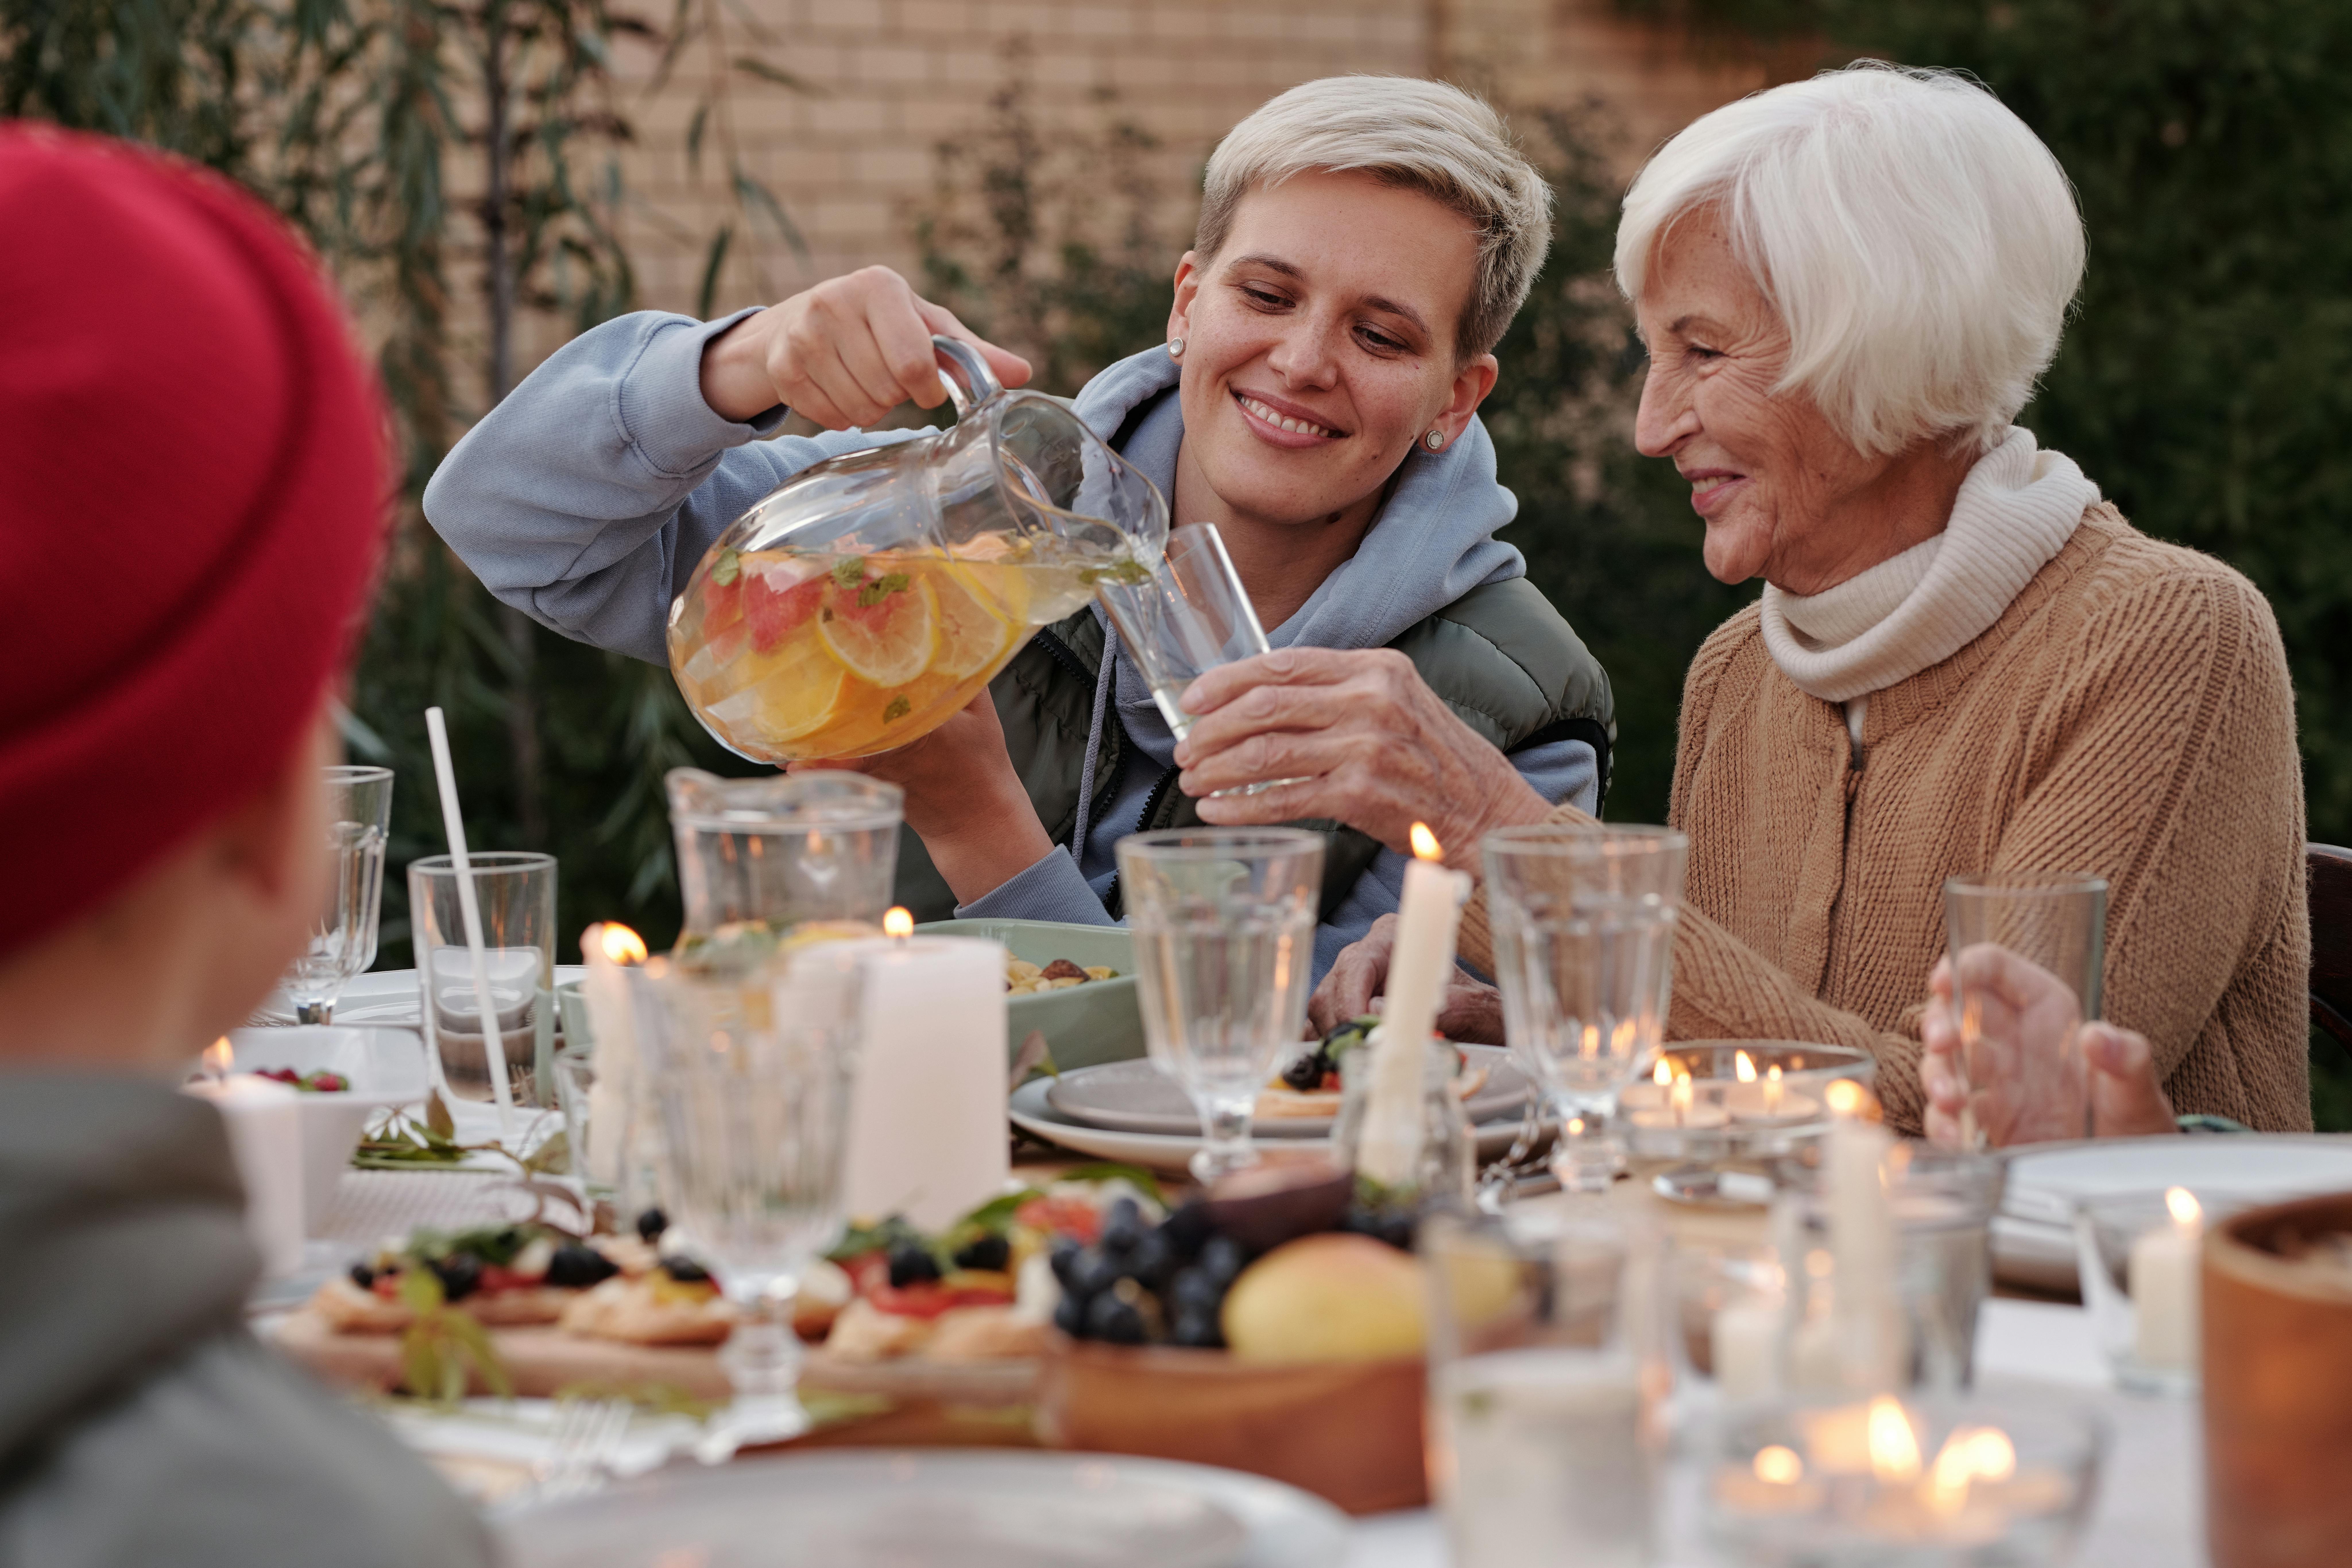 A cheerful young woman filling an older woman's glass with punch as they both smile | Source: Pexels